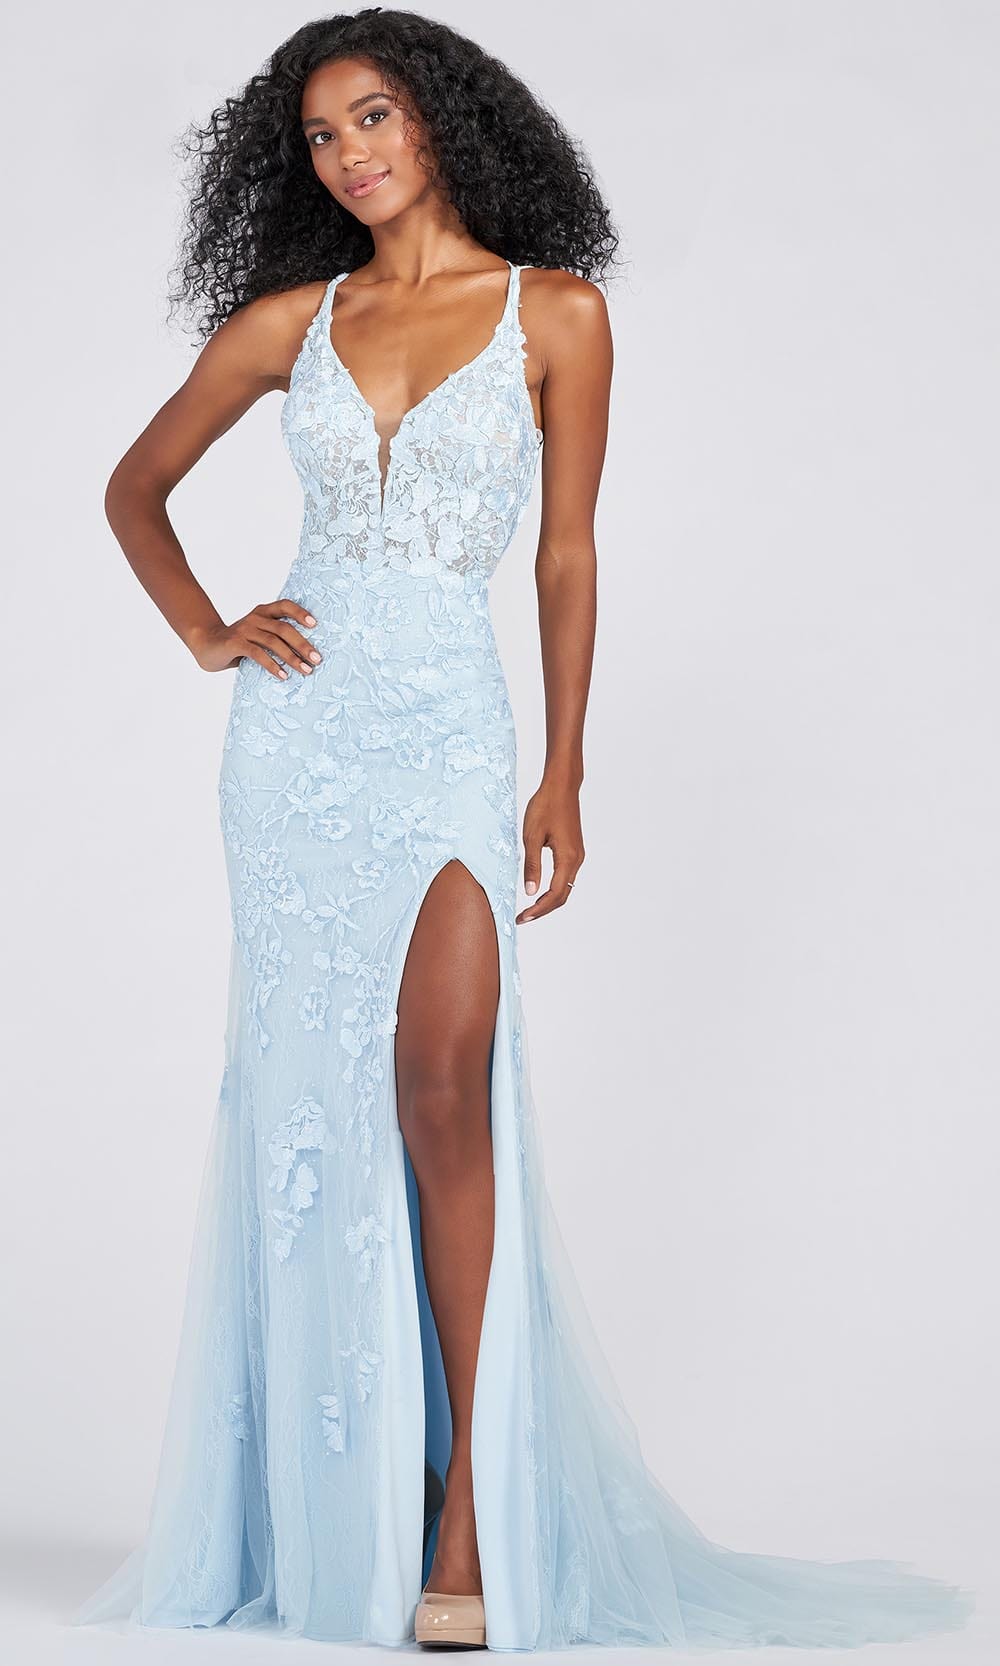 Ellie Wilde EW122098 - Lace And Stone Accents Corset Style Formal Gown Prom Dresses 00 / Light Blue